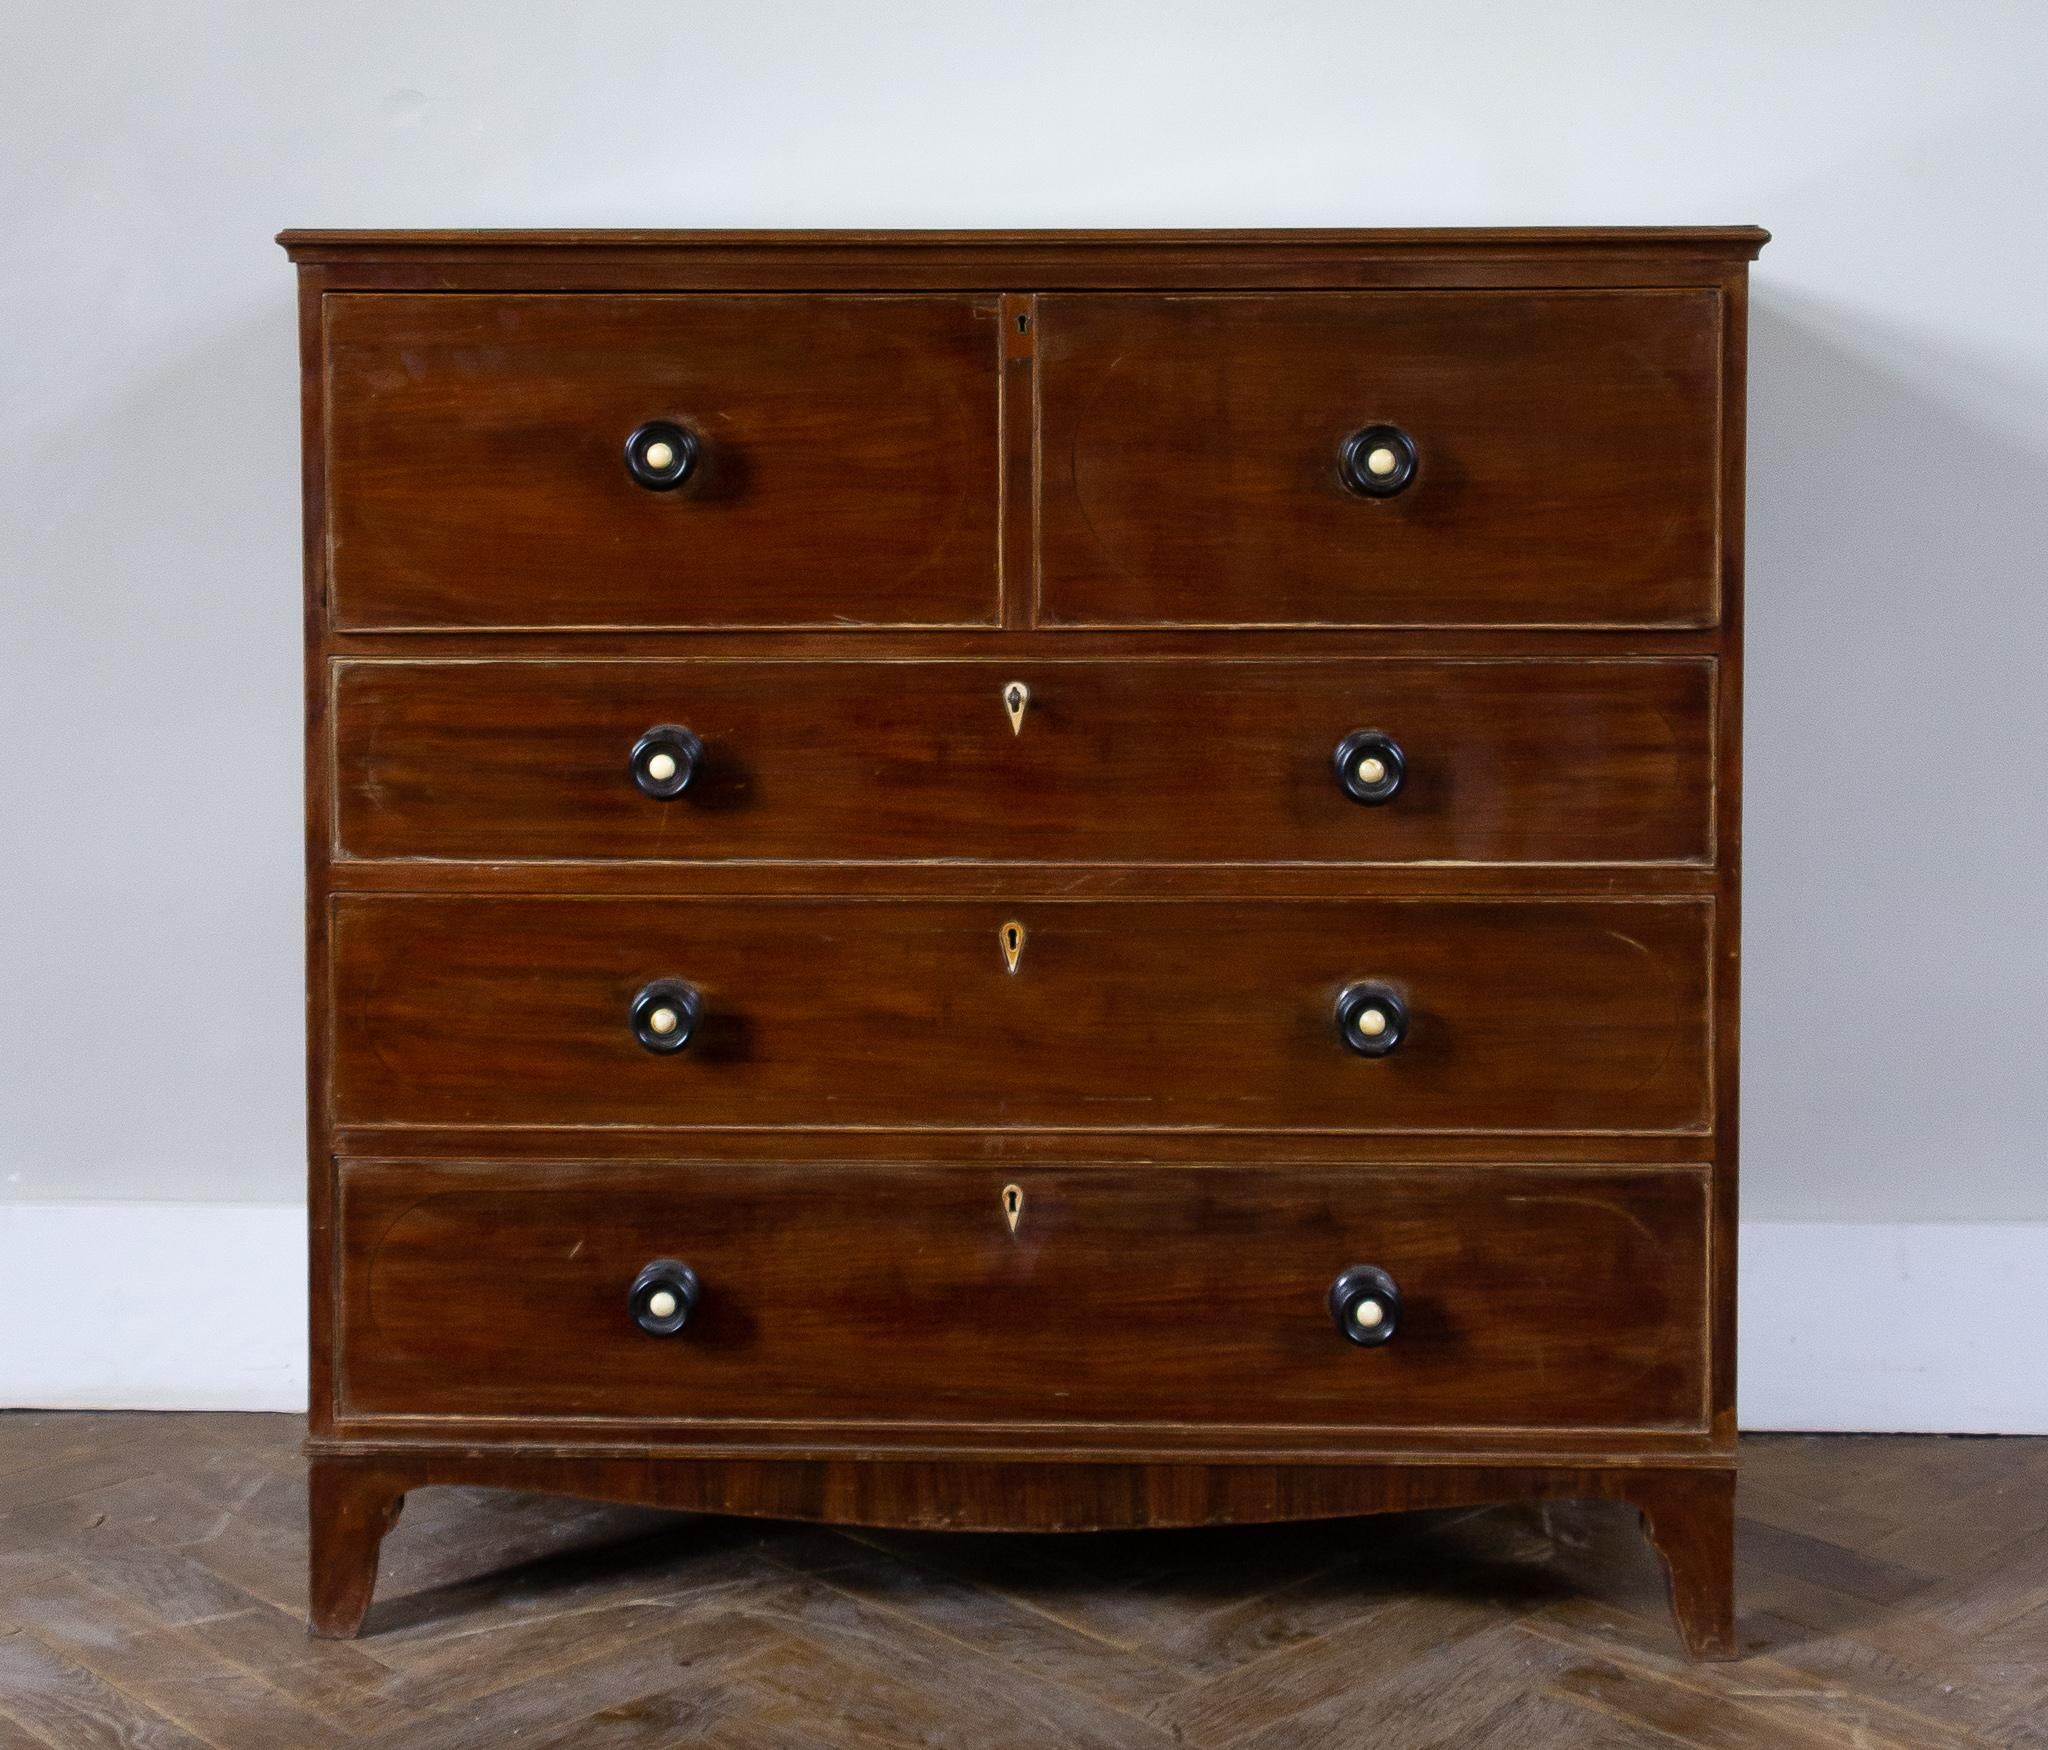 Important English commode secretary from the Georgian period with three large drawers. The upper part simulating two drawers is made of a flap which forms the work table covered with a sheepskin leather and reveals the secretarial part, made up of a